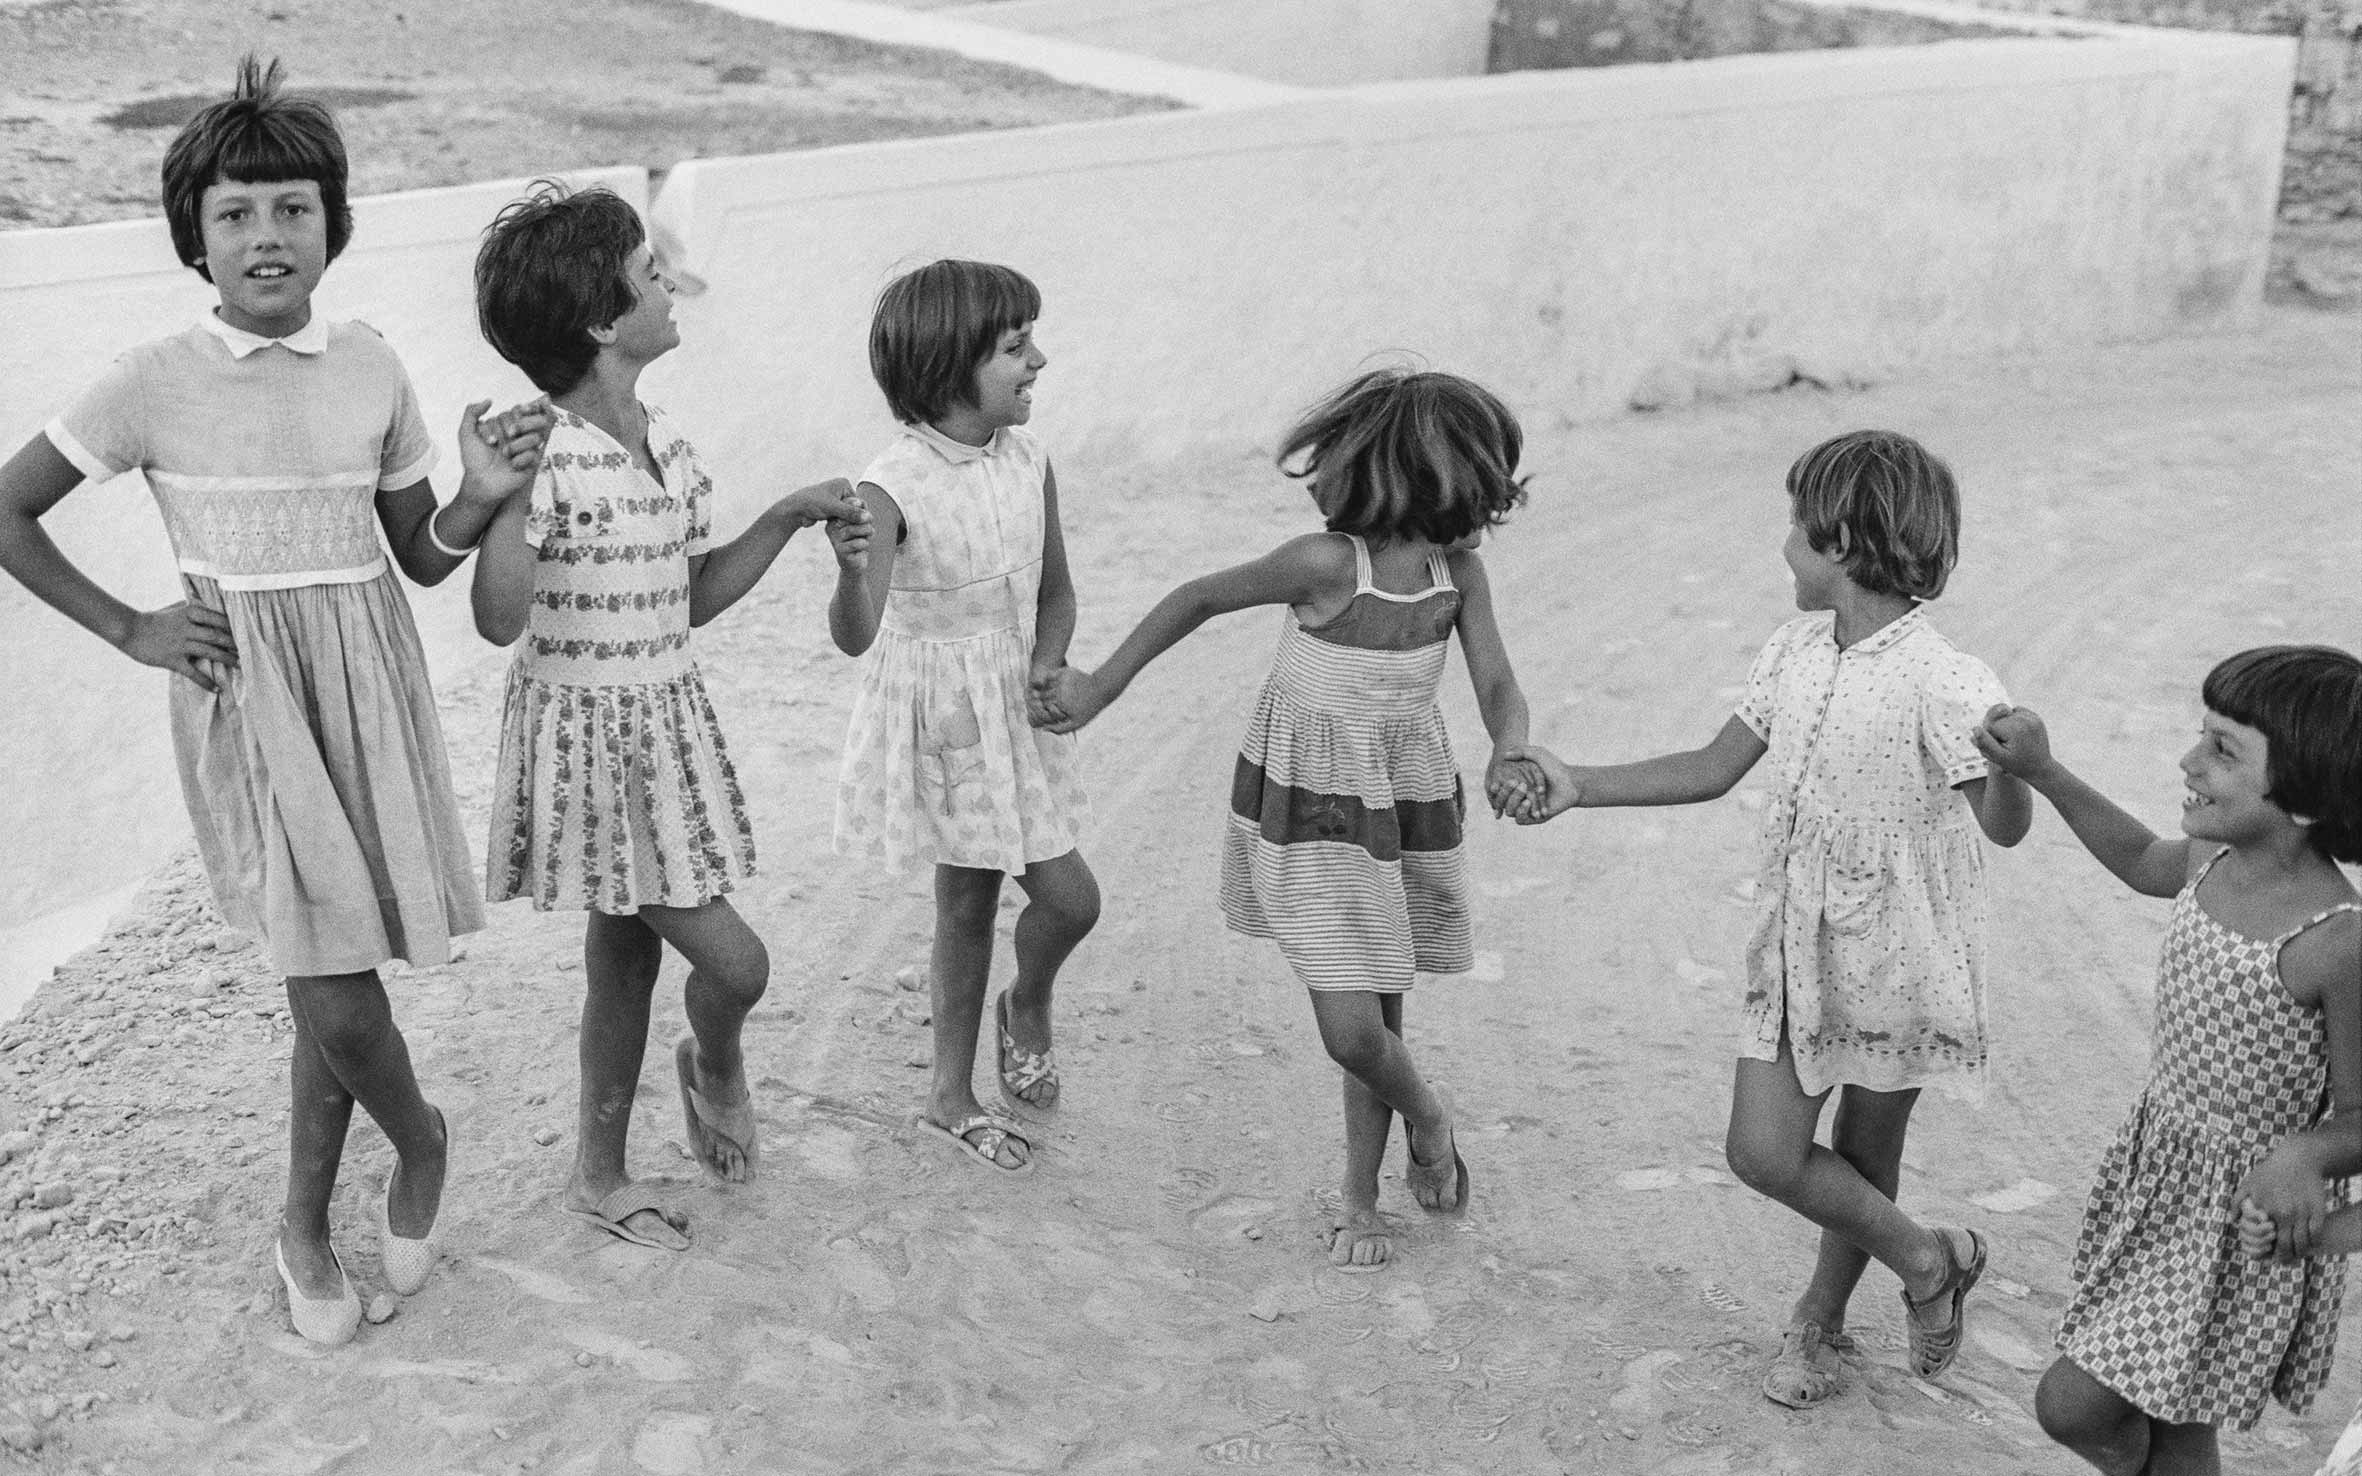 A Postcard From Kasos, 1965: New Photography Book from Robert McCabe